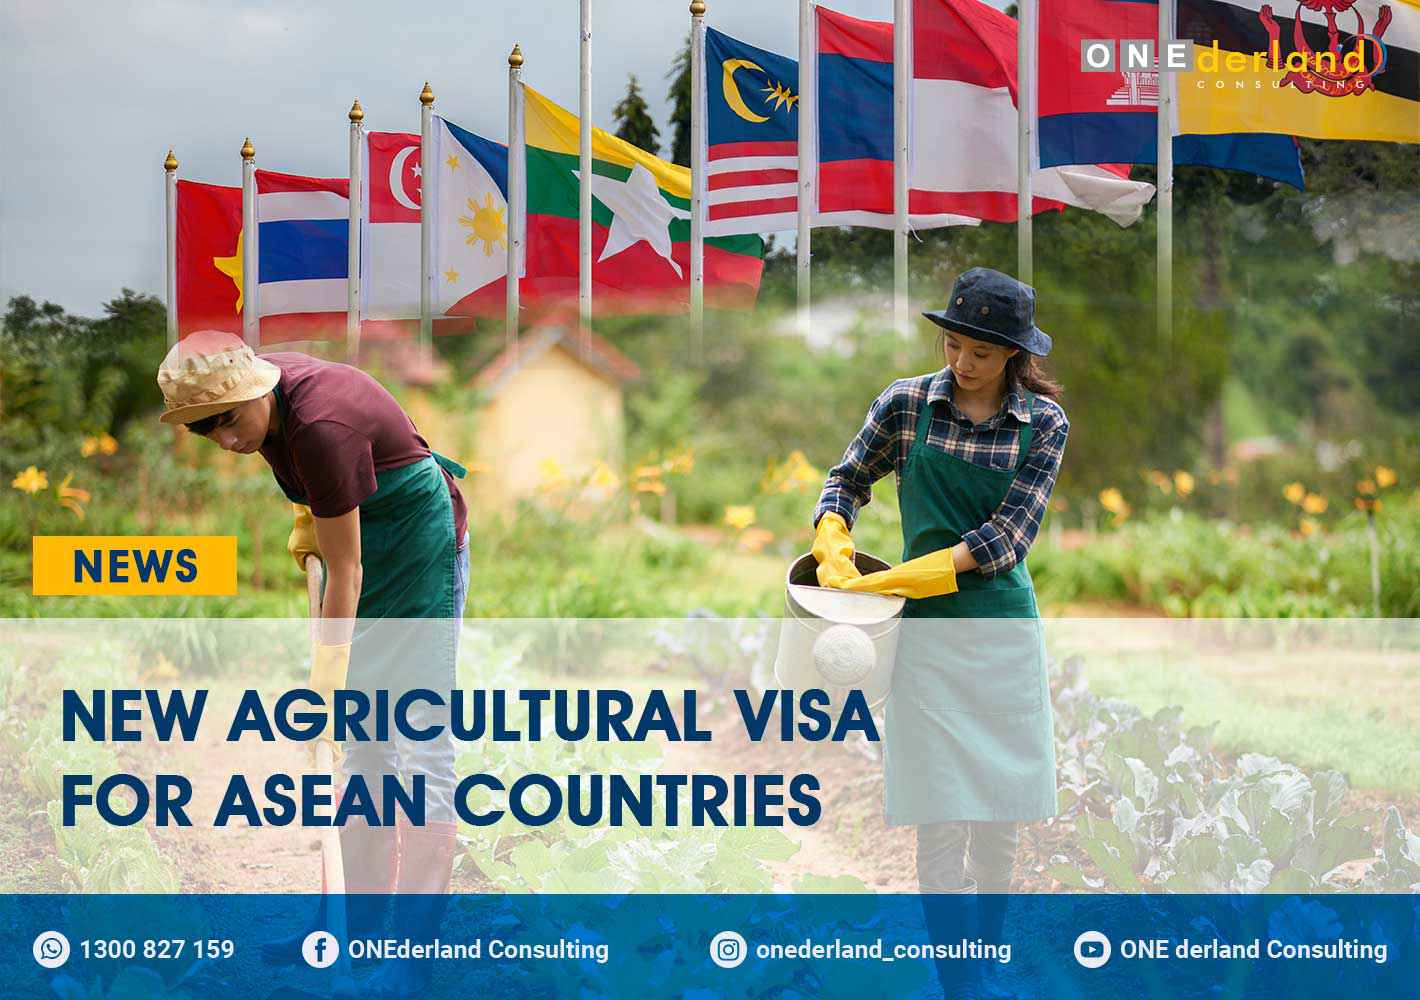 ASEAN Countries Now have Access to a New Agricultural Visa